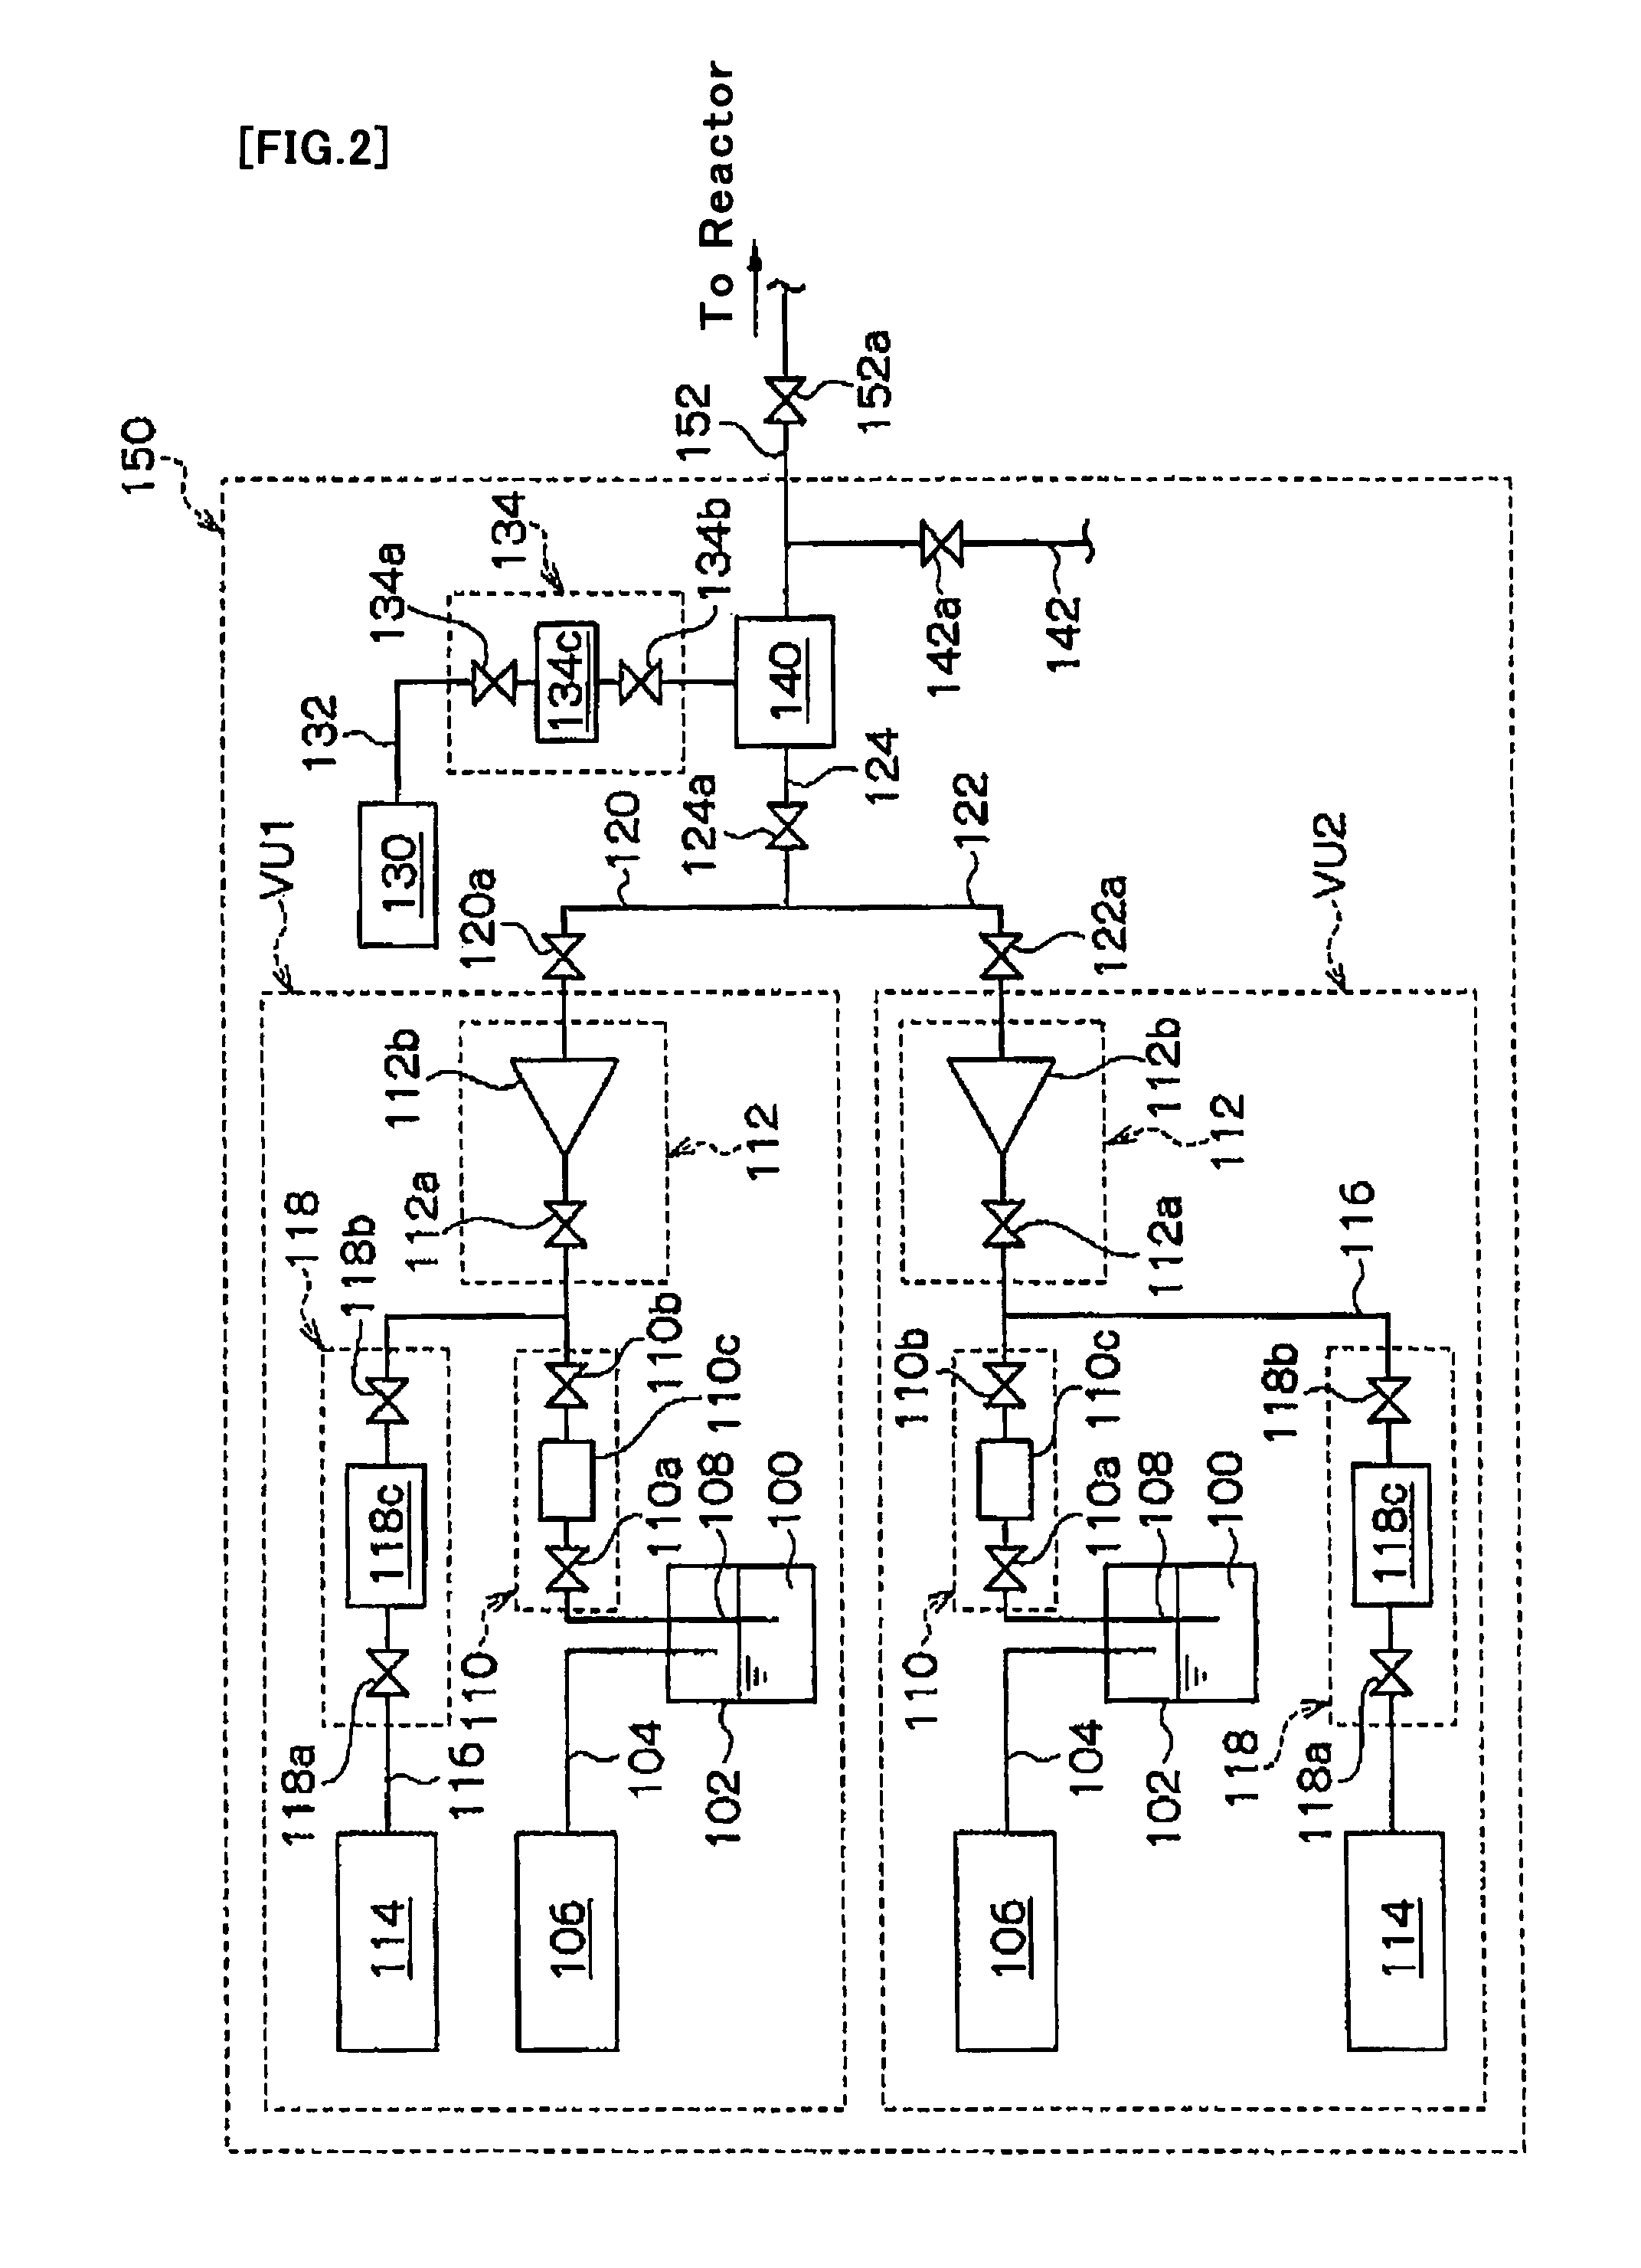 Method of Fabricating Organic Silicon Film, Semiconductor Device Including the Same, and Method of Fabricating the Semiconductor Device